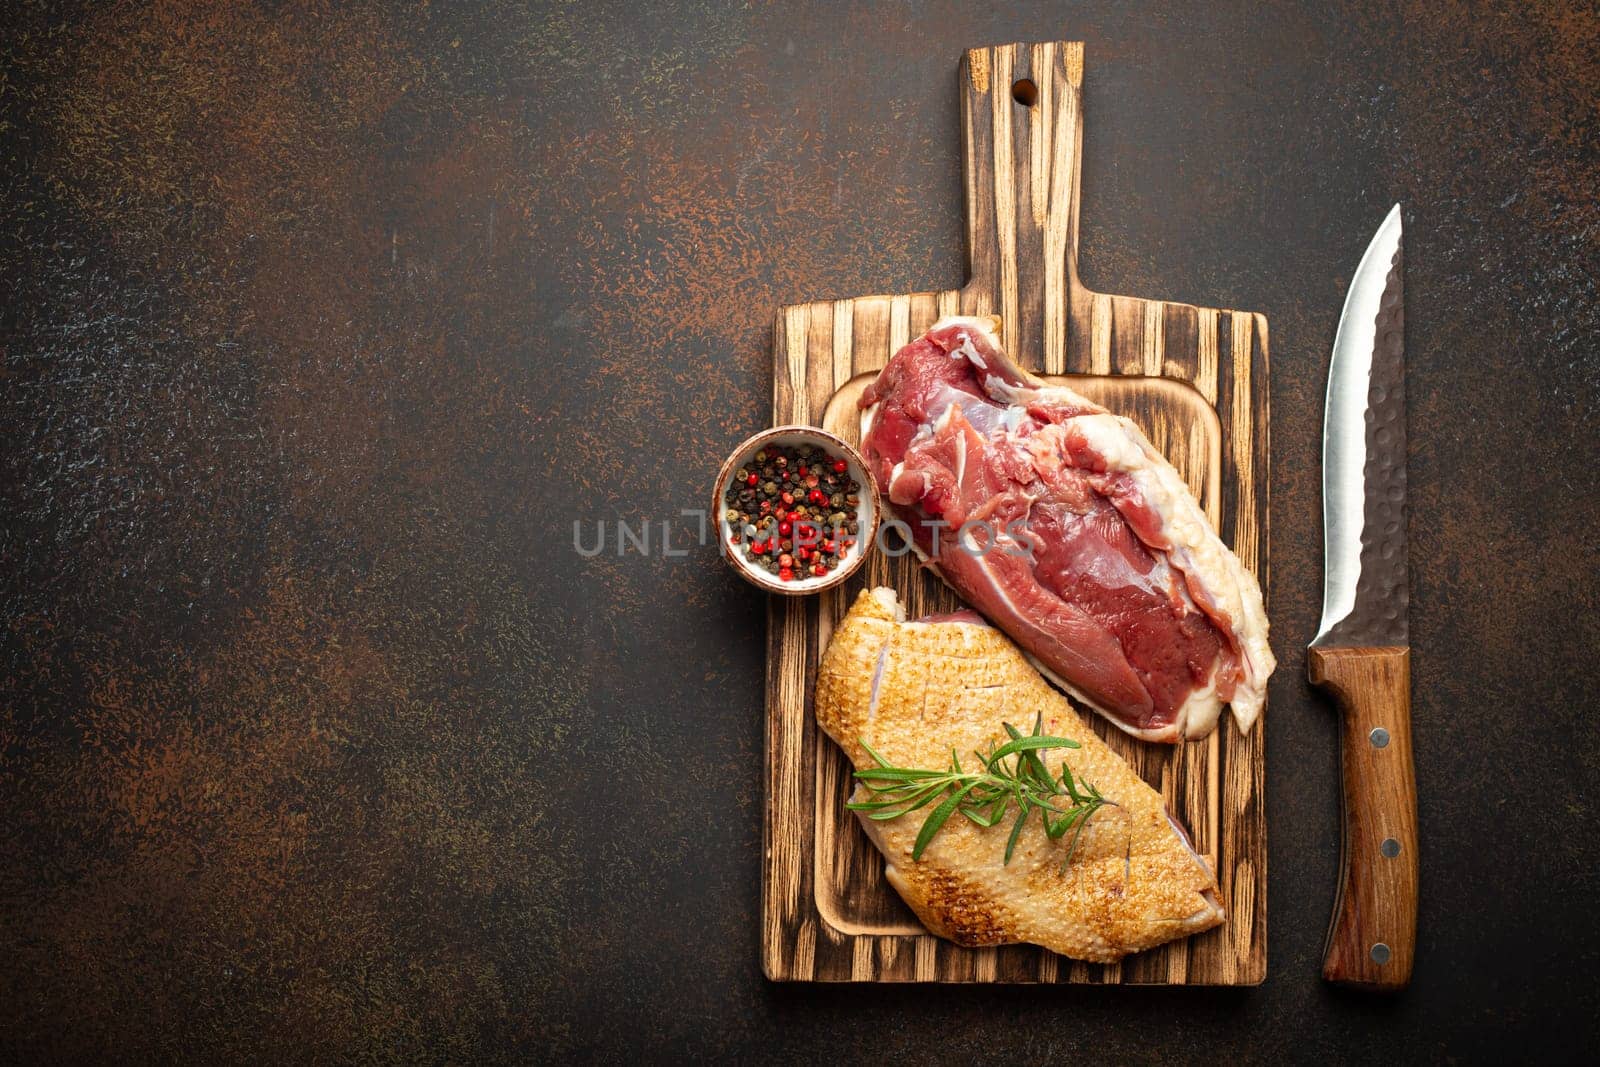 Two raw uncooked duck breast fillets with skin, seasoned with salt, pepper, rosemary top view on wooden cutting board with knife, dark brown concrete rustic background, space for text by its_al_dente